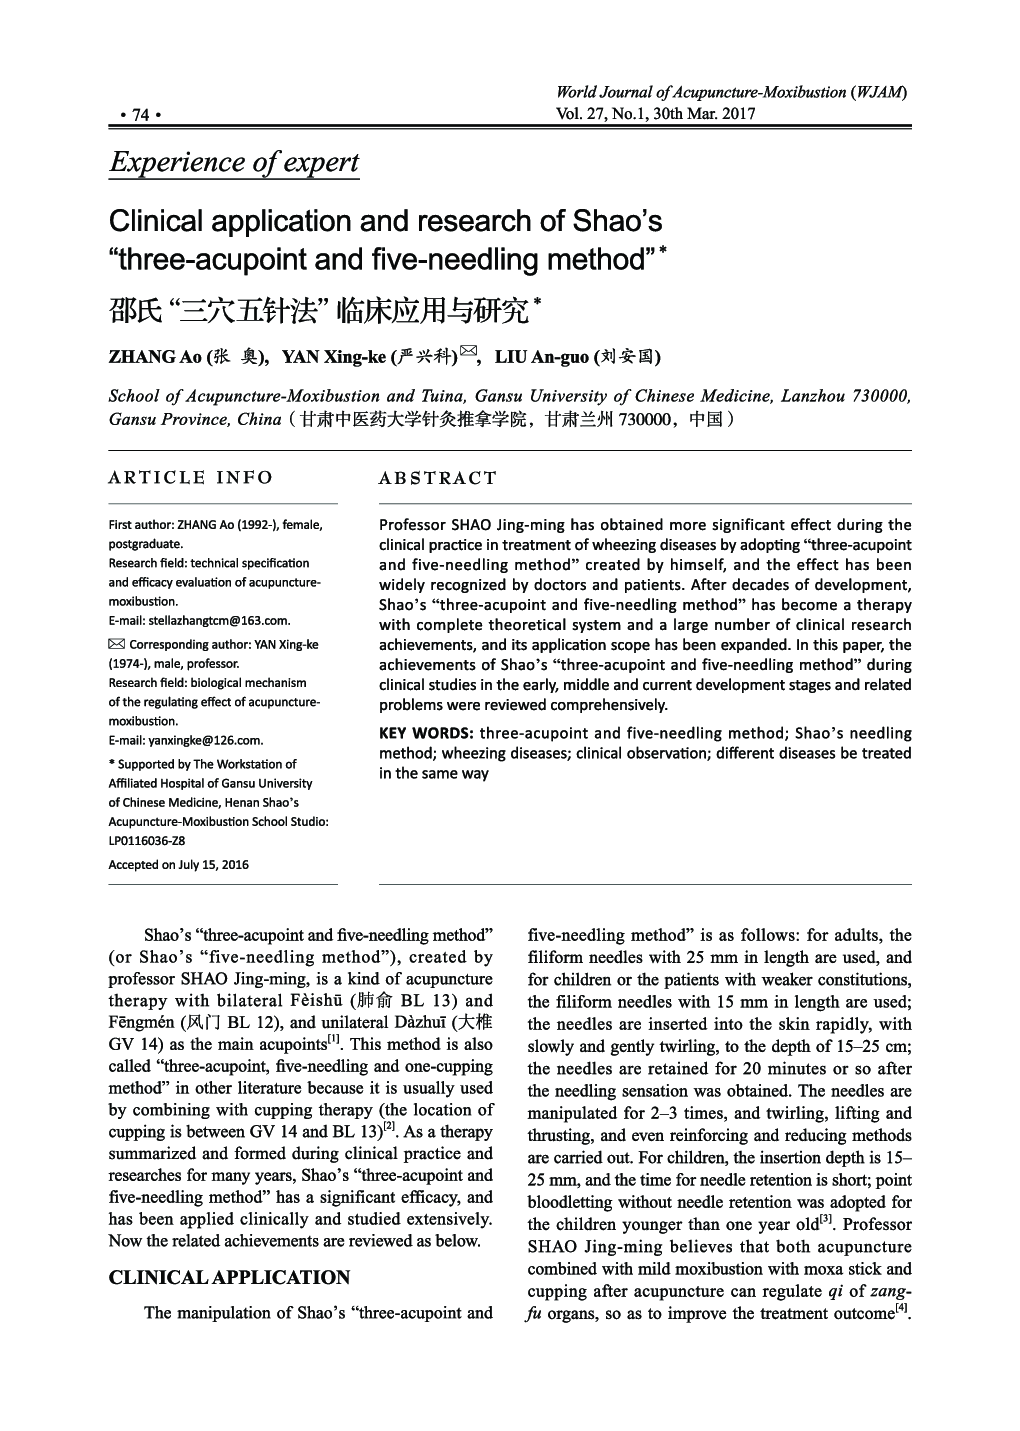 Clinical application and research of Shao's “three-acupoint and five-needling method”